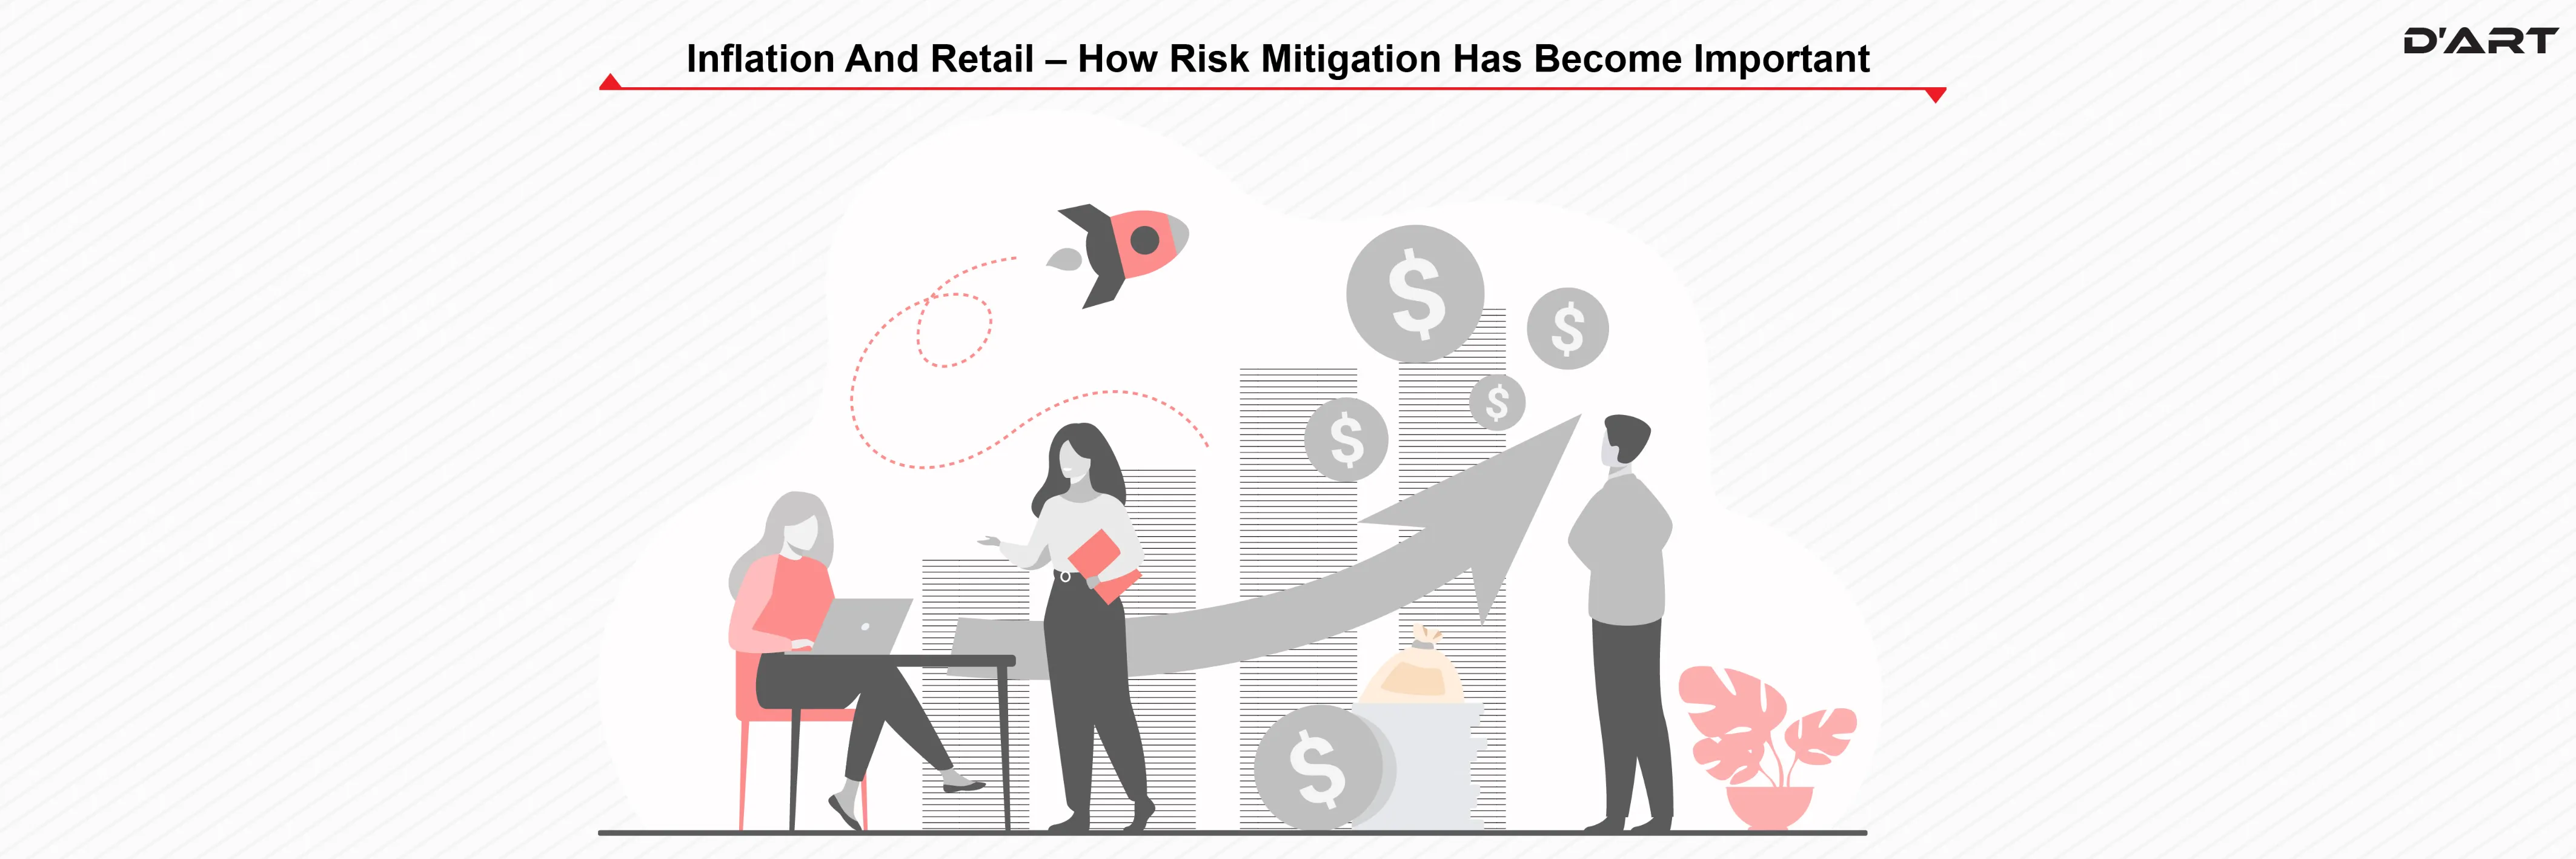 Inflation and retail – how risk mitigation has become important